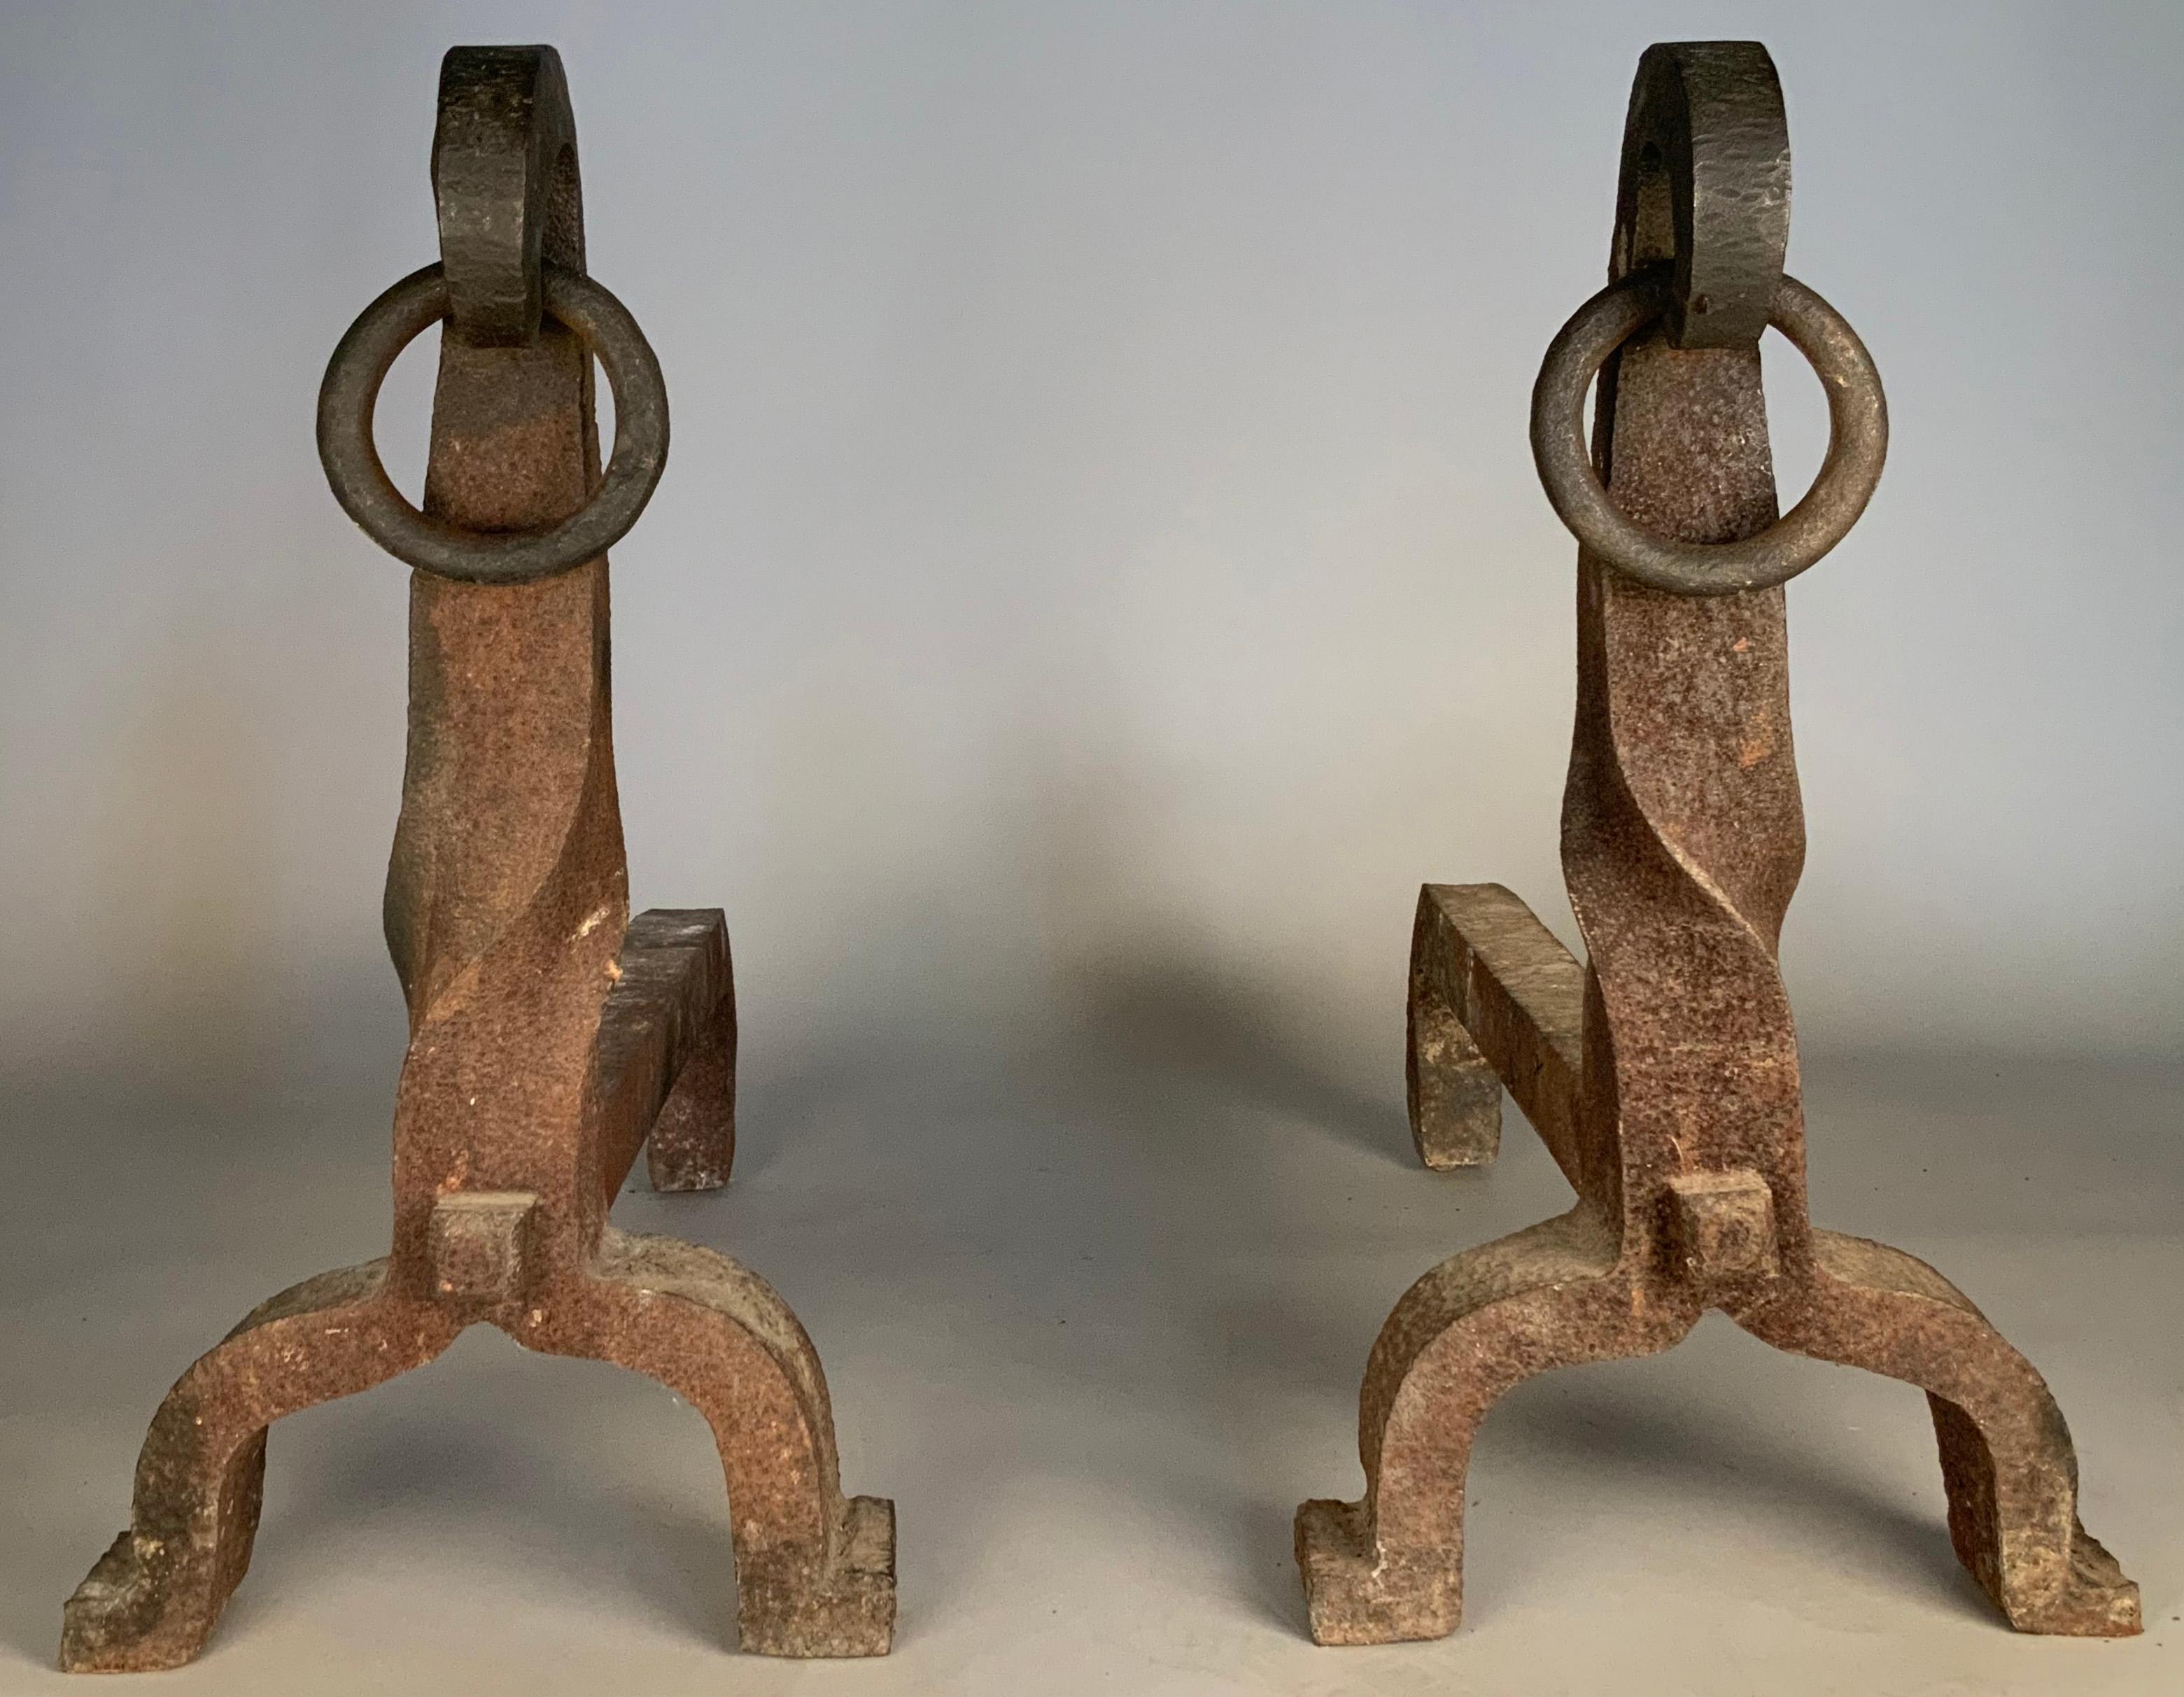 a very large pair of antique 1920's cast iron andirons, with twisted stems terminating in a curled top with a loose iron ring. Very heavy and very well made. Wonderful scale and proportions.